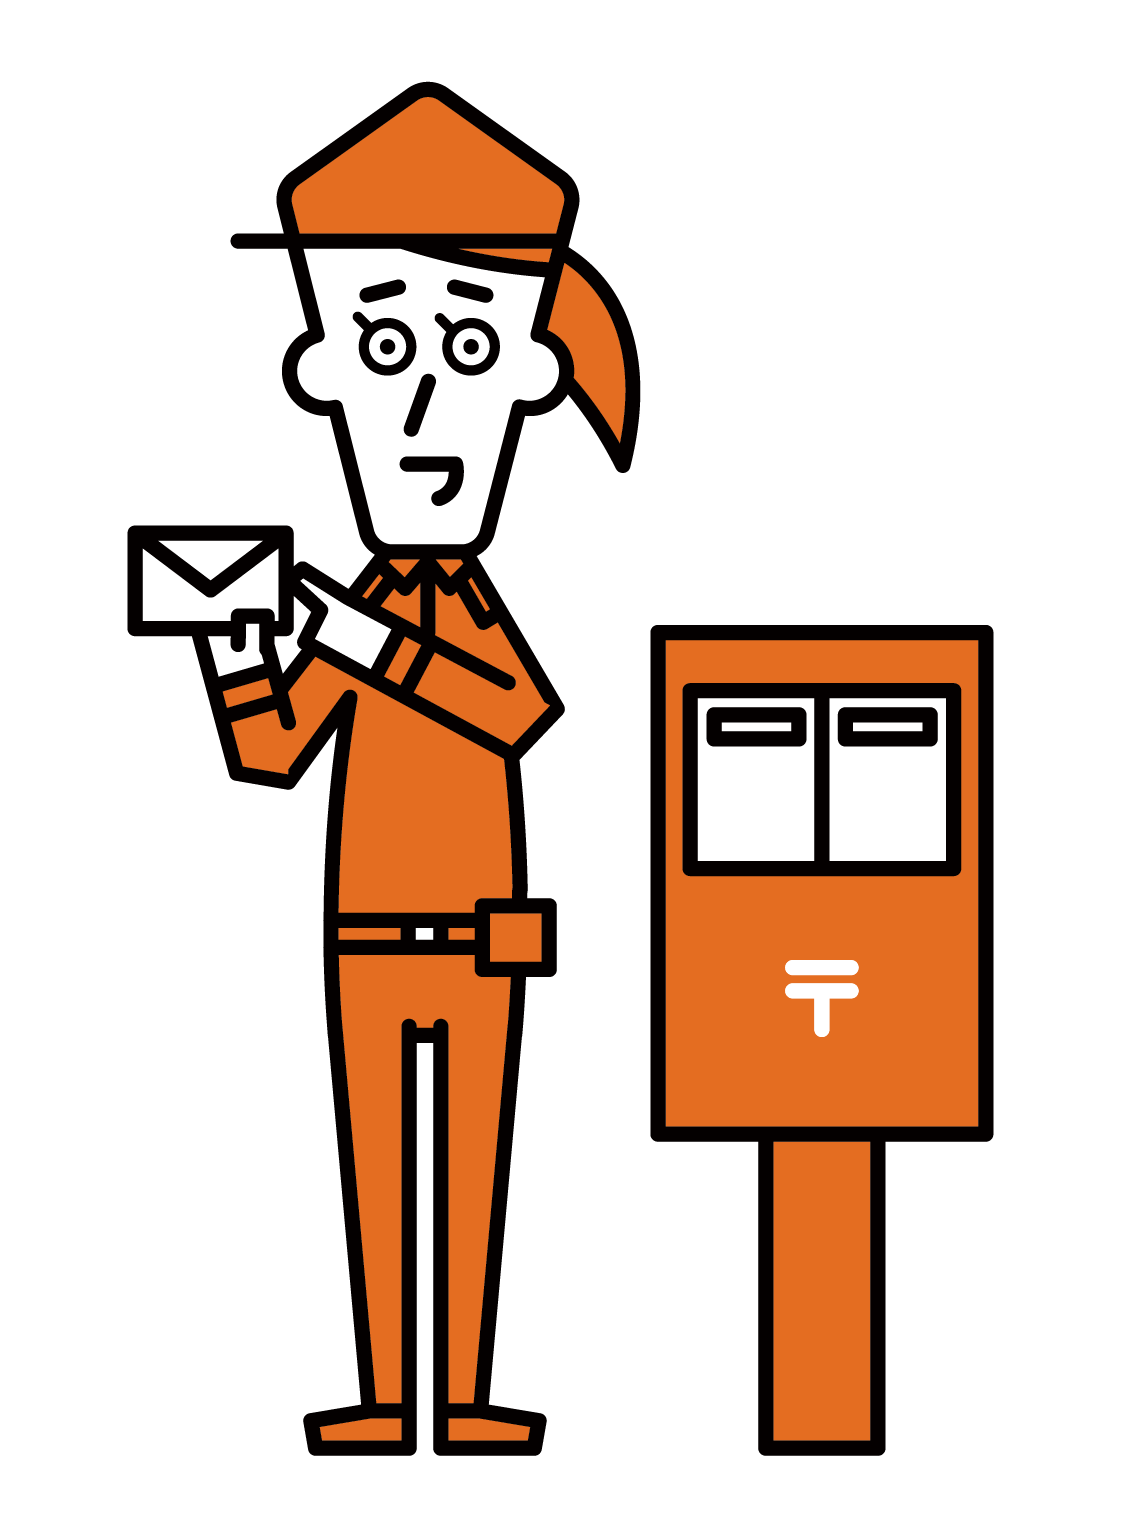 Illustration of a postman standing next to a postoffice